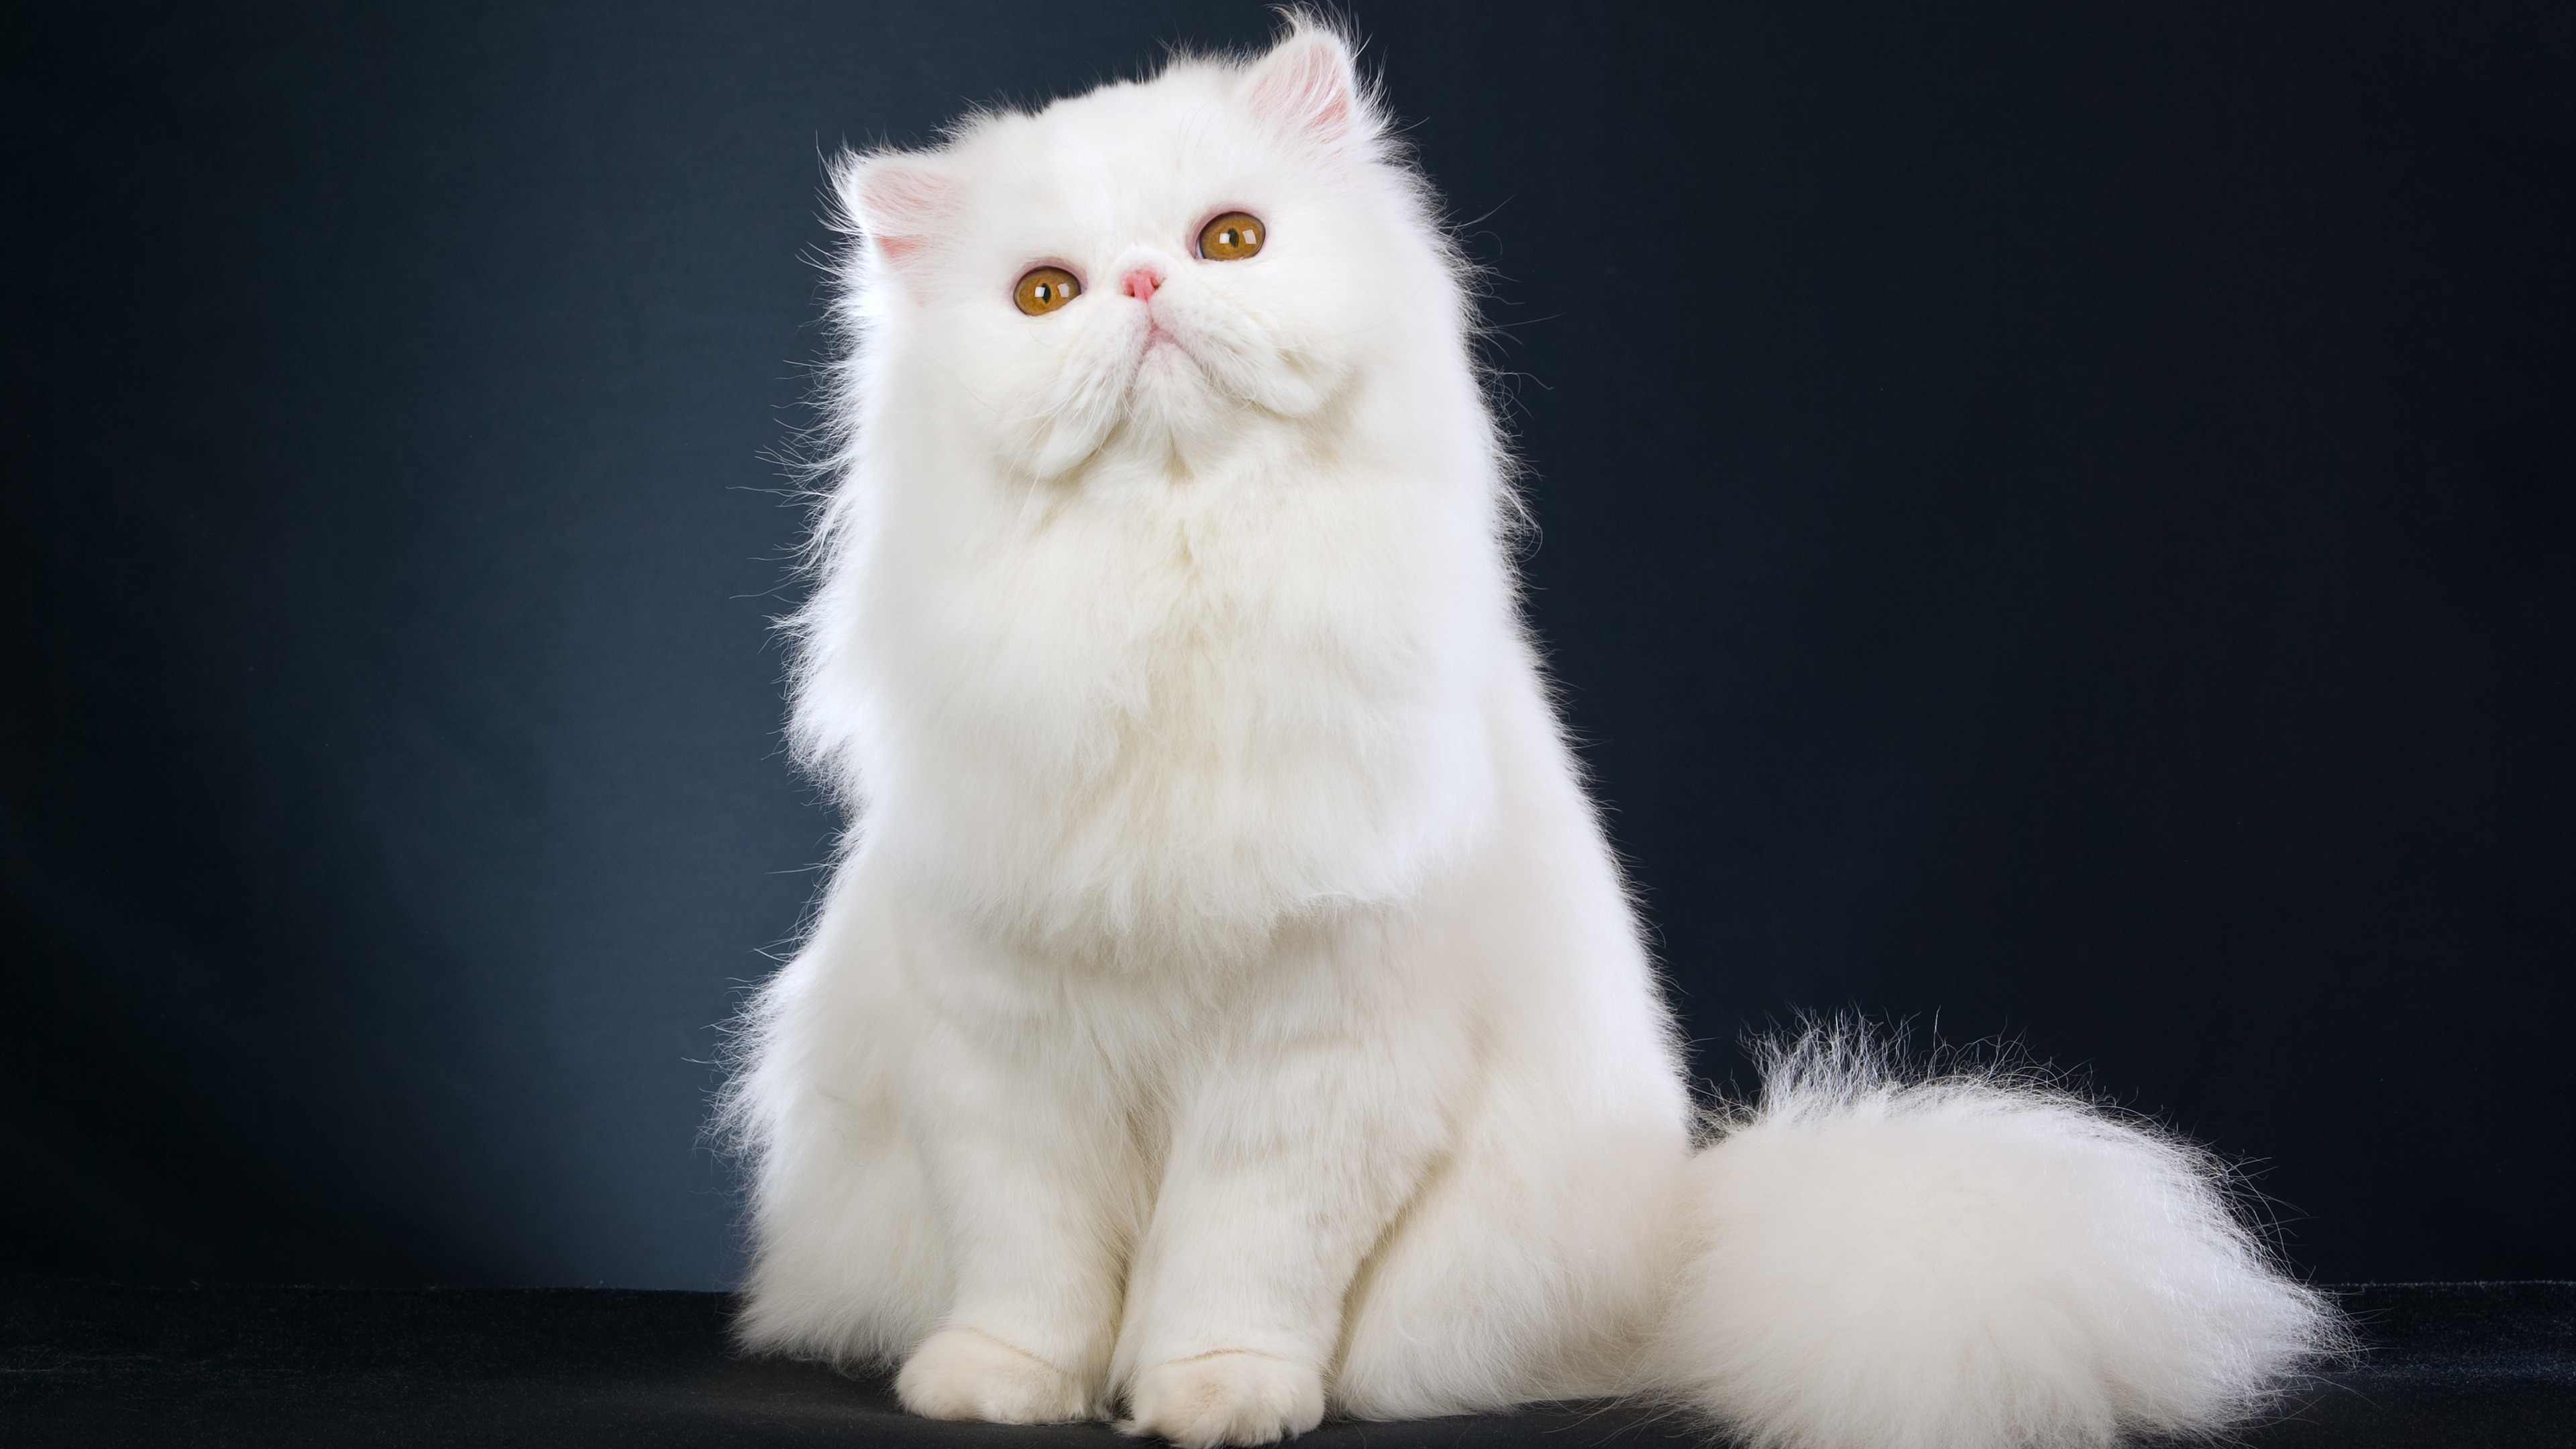 Cute White Cat for 3840 x 2160 Ultra HD resolution